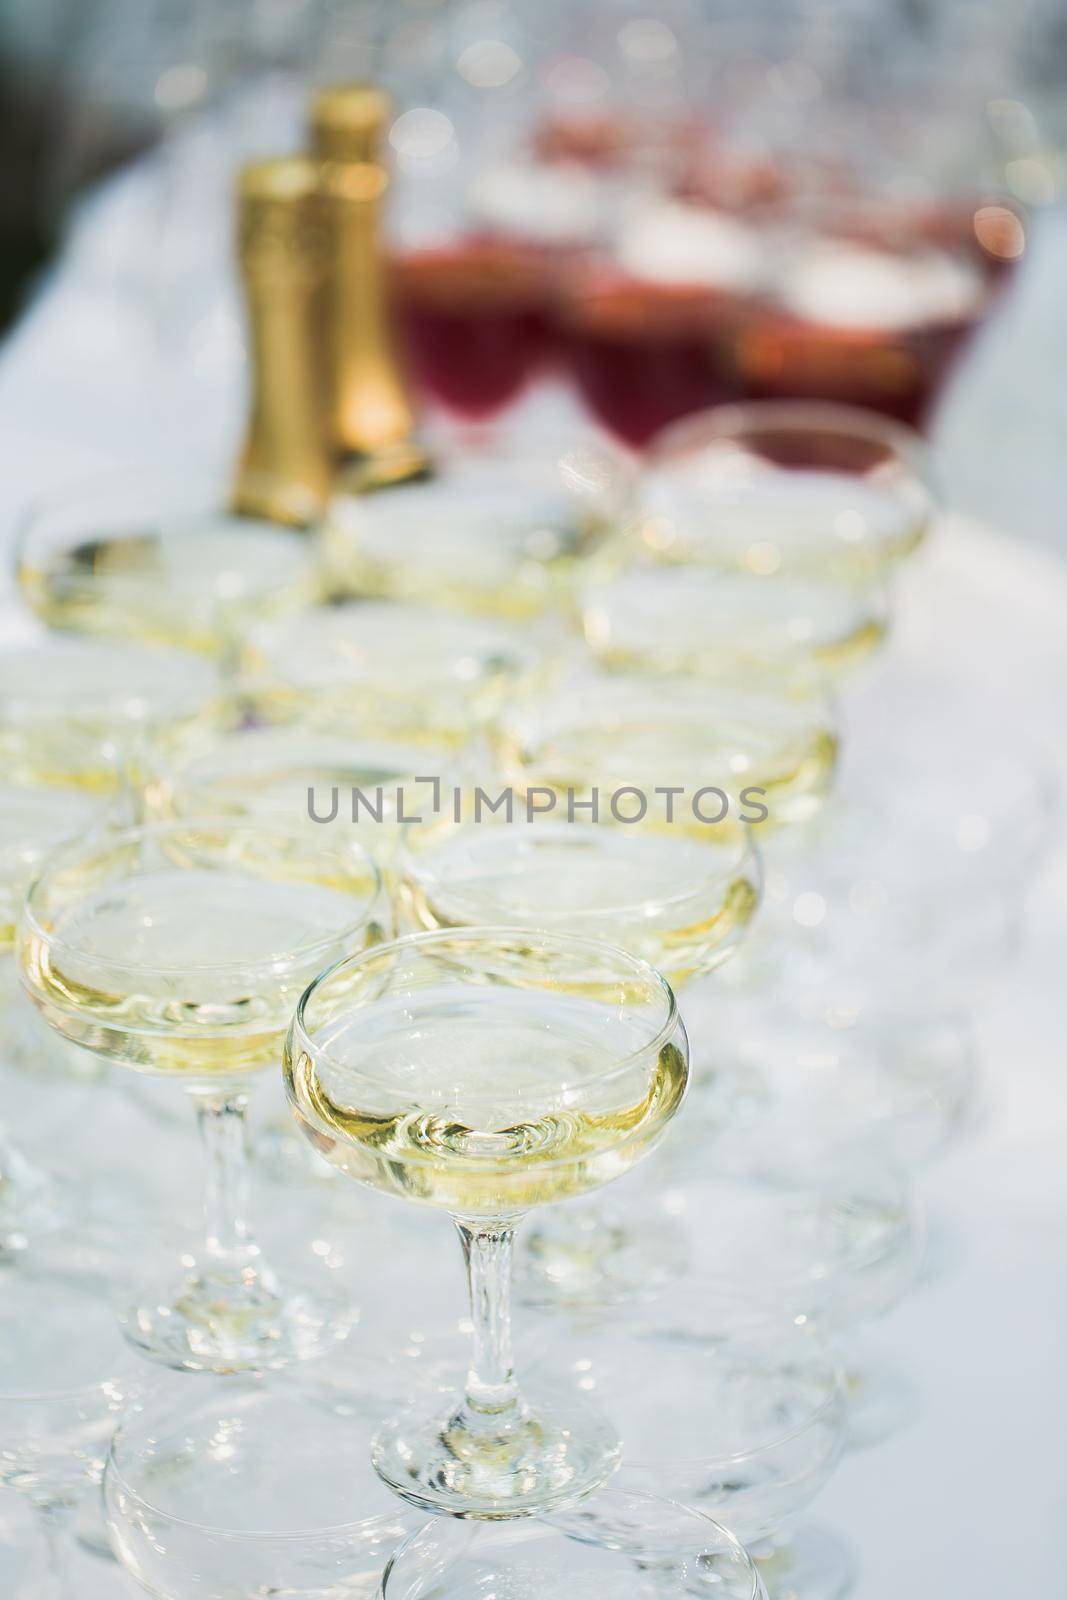 Many glasses of champagne at the wedding reception.